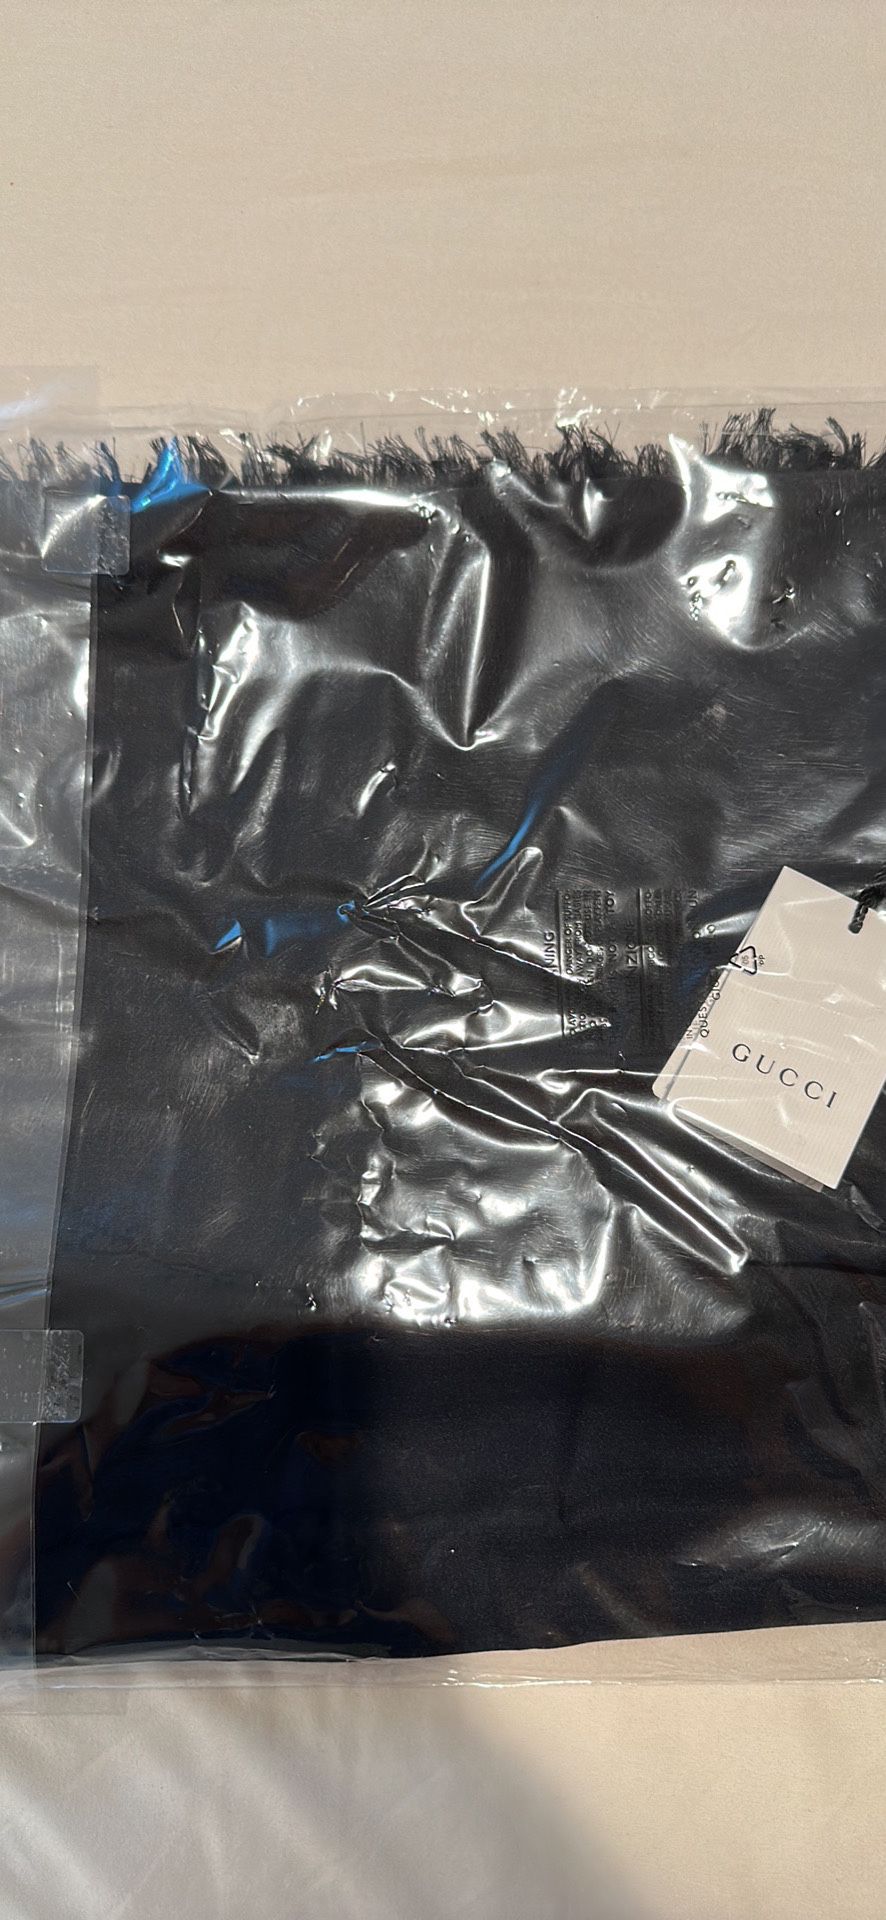 AUTHENTIC Gucci Black GG Wool Scarf 135x135 Brand New With Tags. RRP: €490 Equivalent Of $535. From And Made In Italy. 